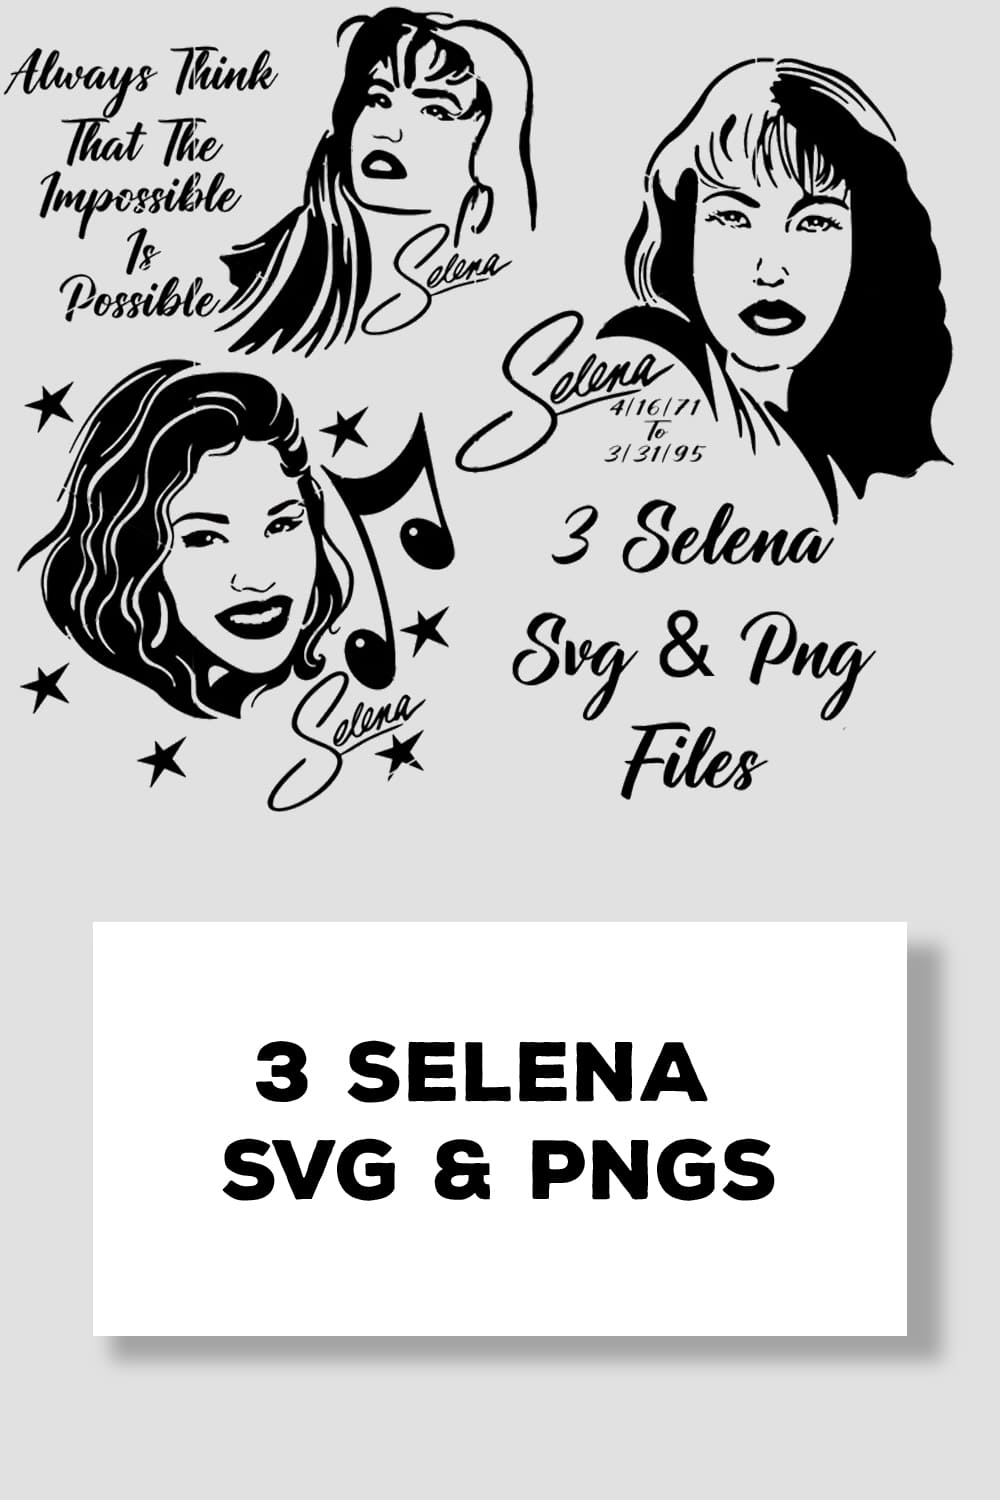 3 Selena SVG and PNGs pinterest image.